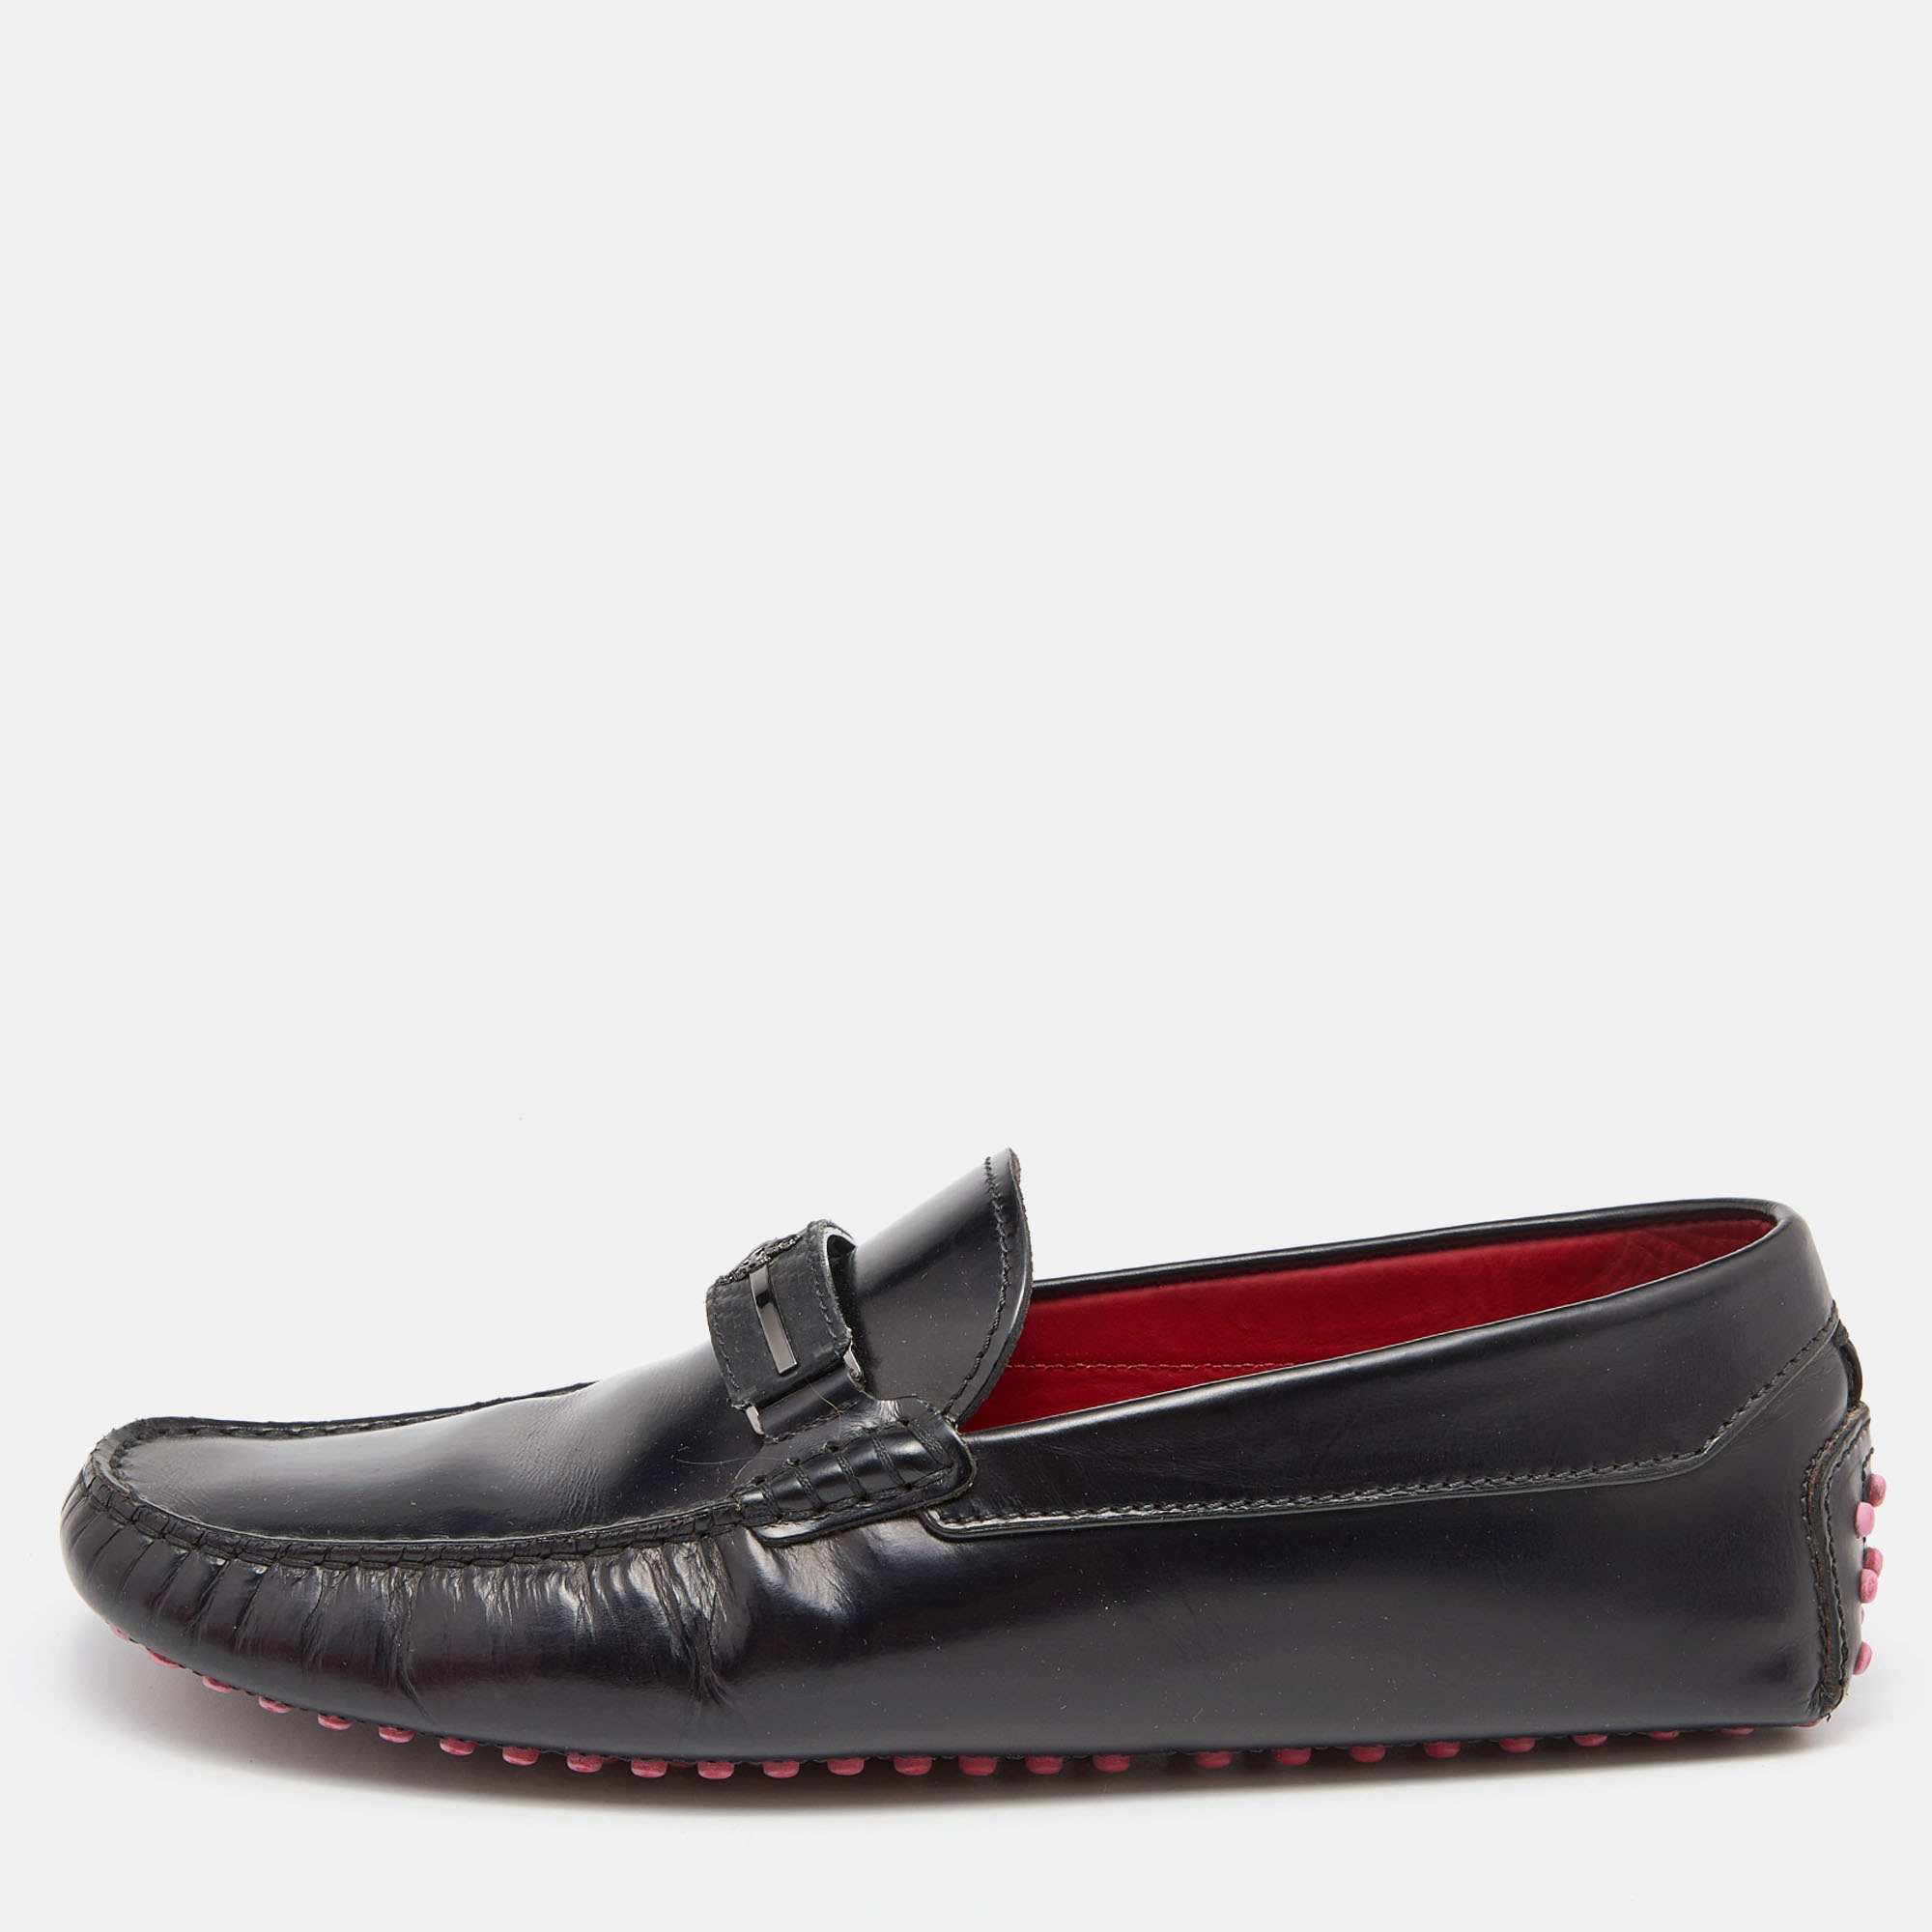 

Tod's For Ferrari Black Leather Slip On Loafers Size